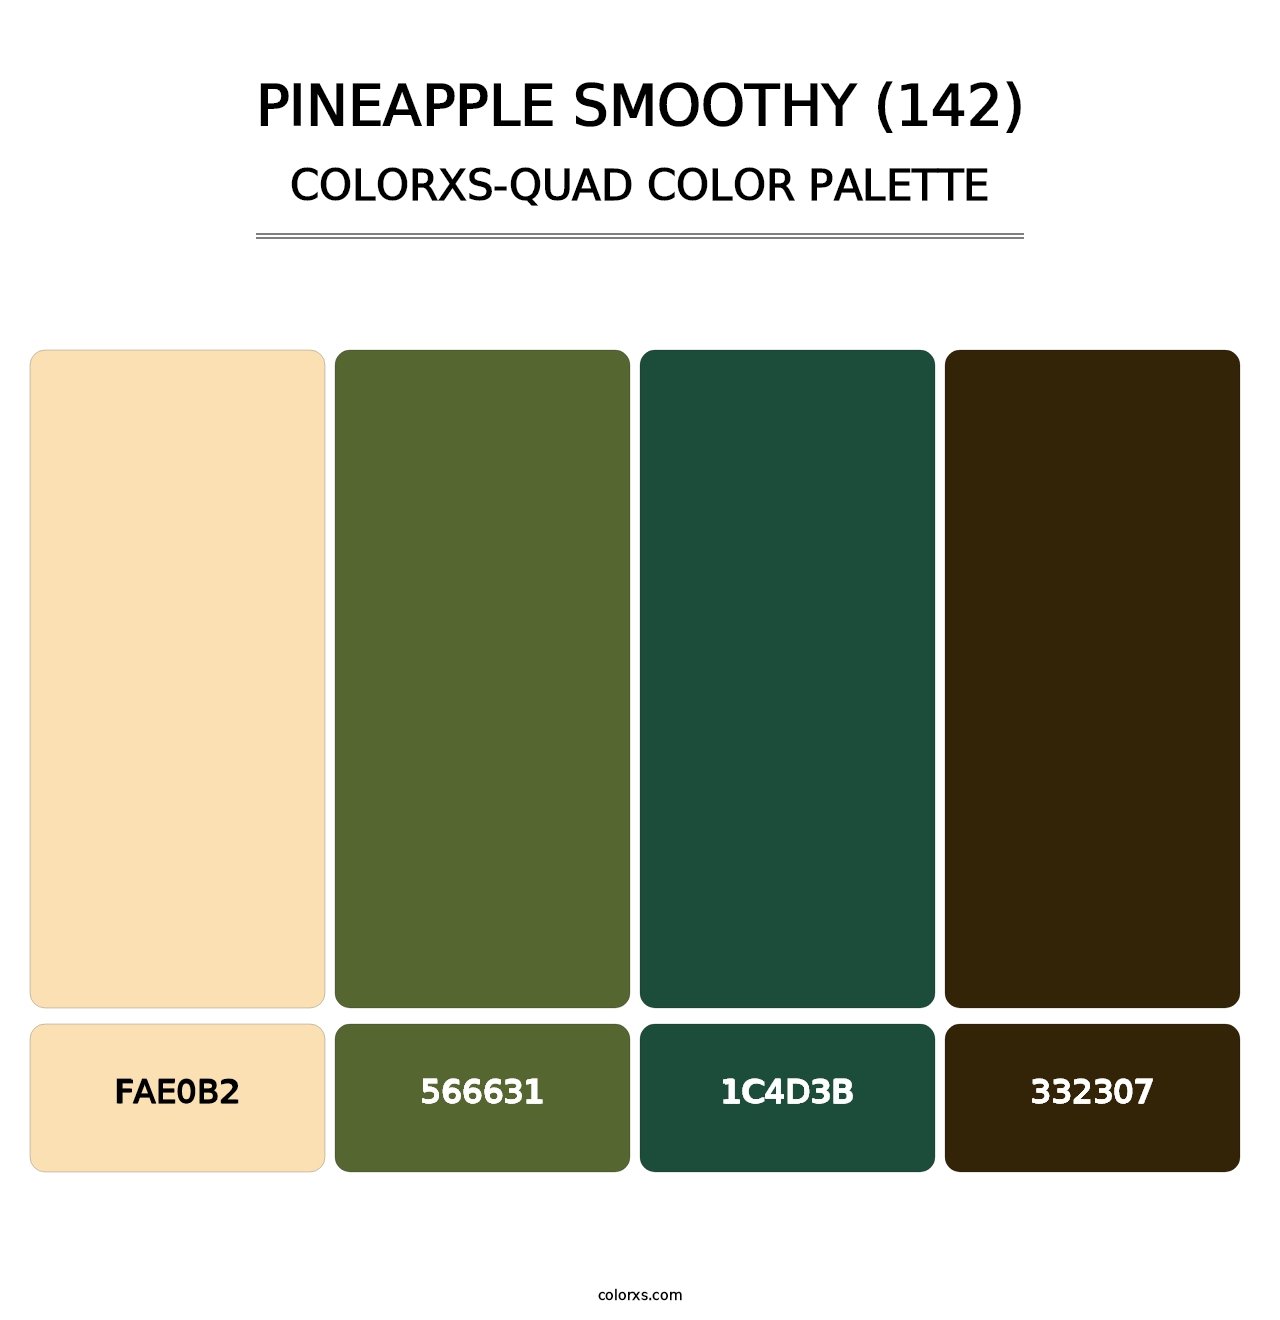 Pineapple Smoothy (142) - Colorxs Quad Palette